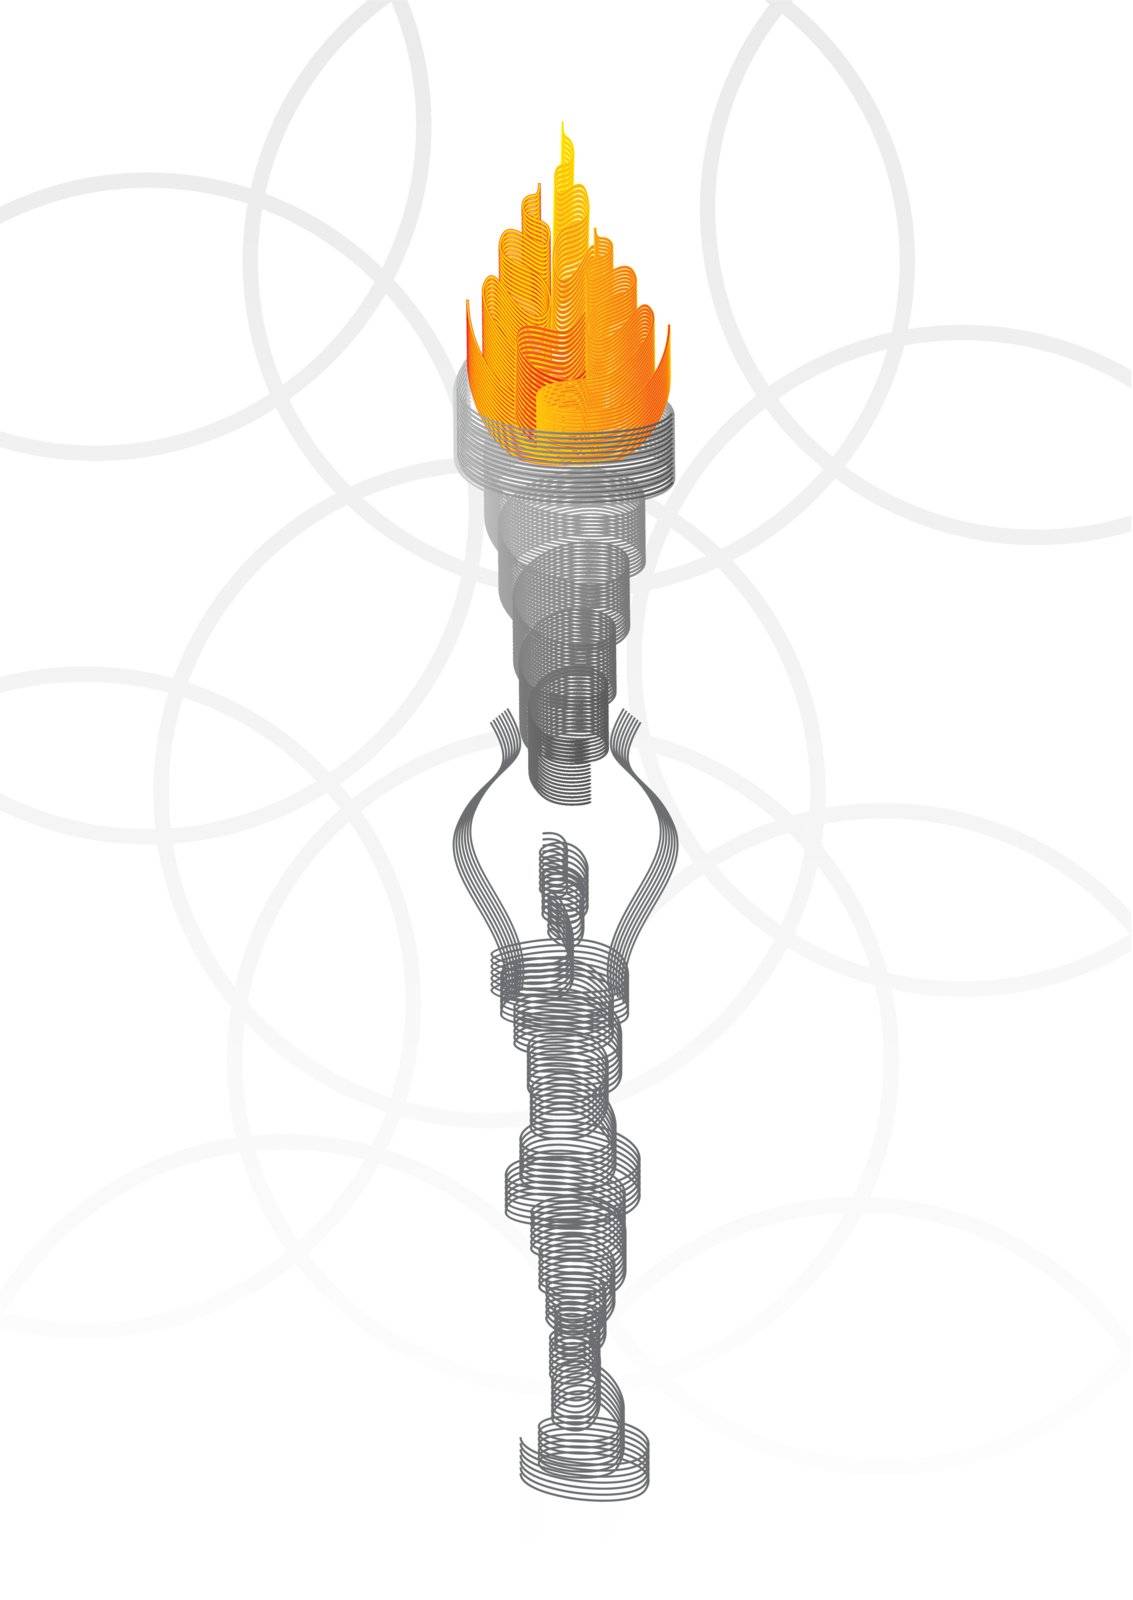 Abstract statue holding the flaming torch vector illustration